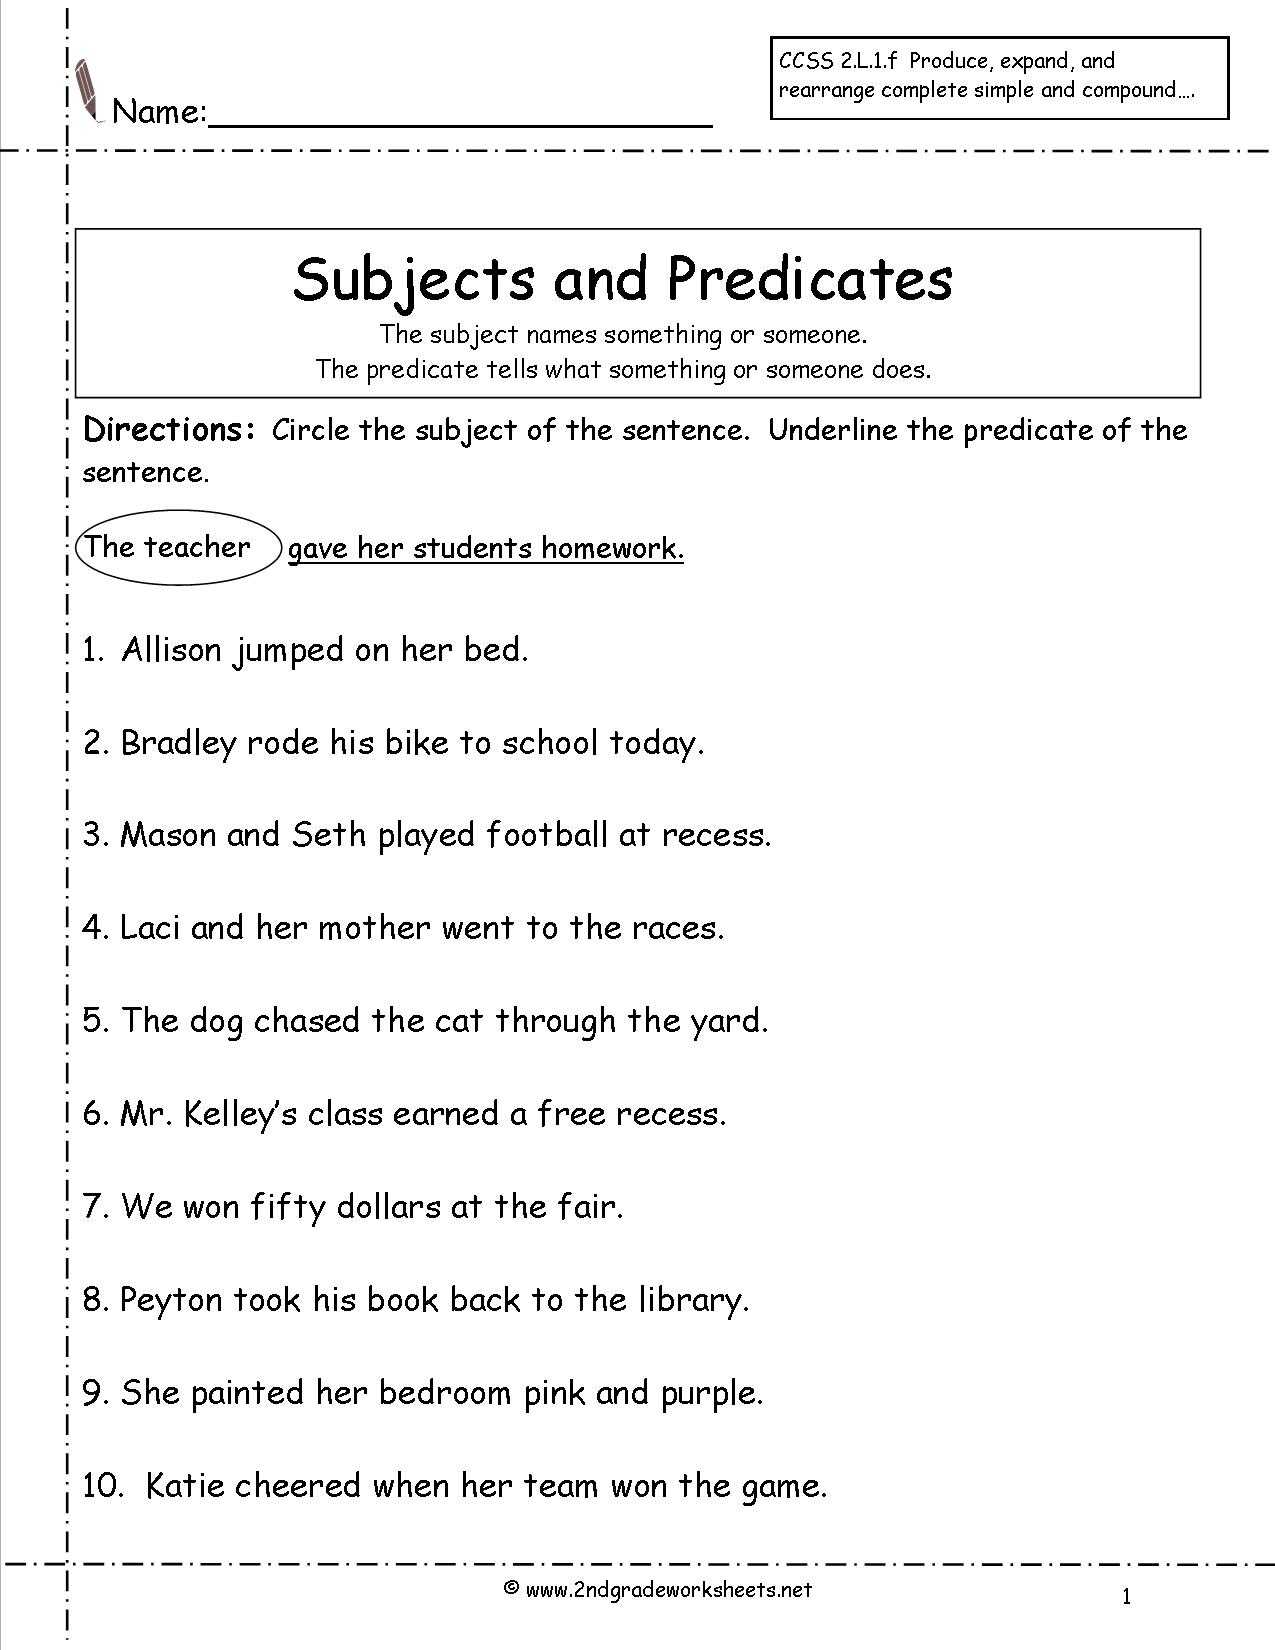 Simple Compound and Complex Sentences Worksheet Pdf with Answers Along with Plete and Simple Predicates Worksheets Worksheets for All